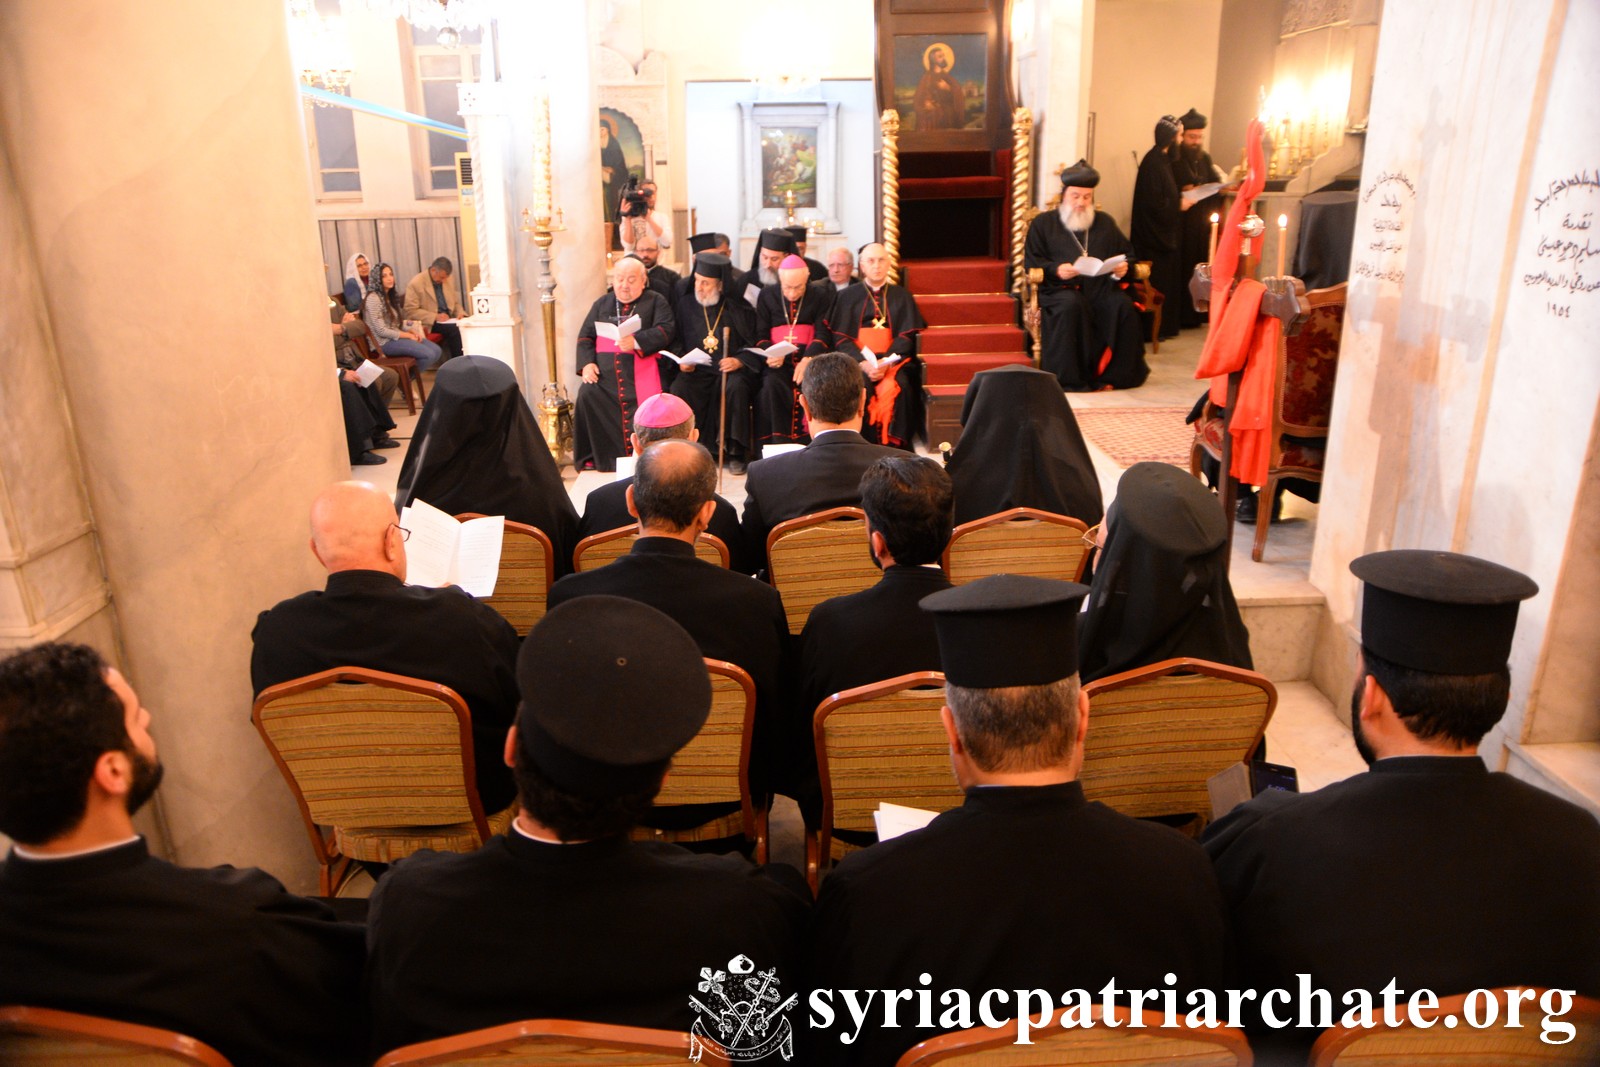 4 Years after the Abduction of the Archbishops of Aleppo – Prayer for their Return